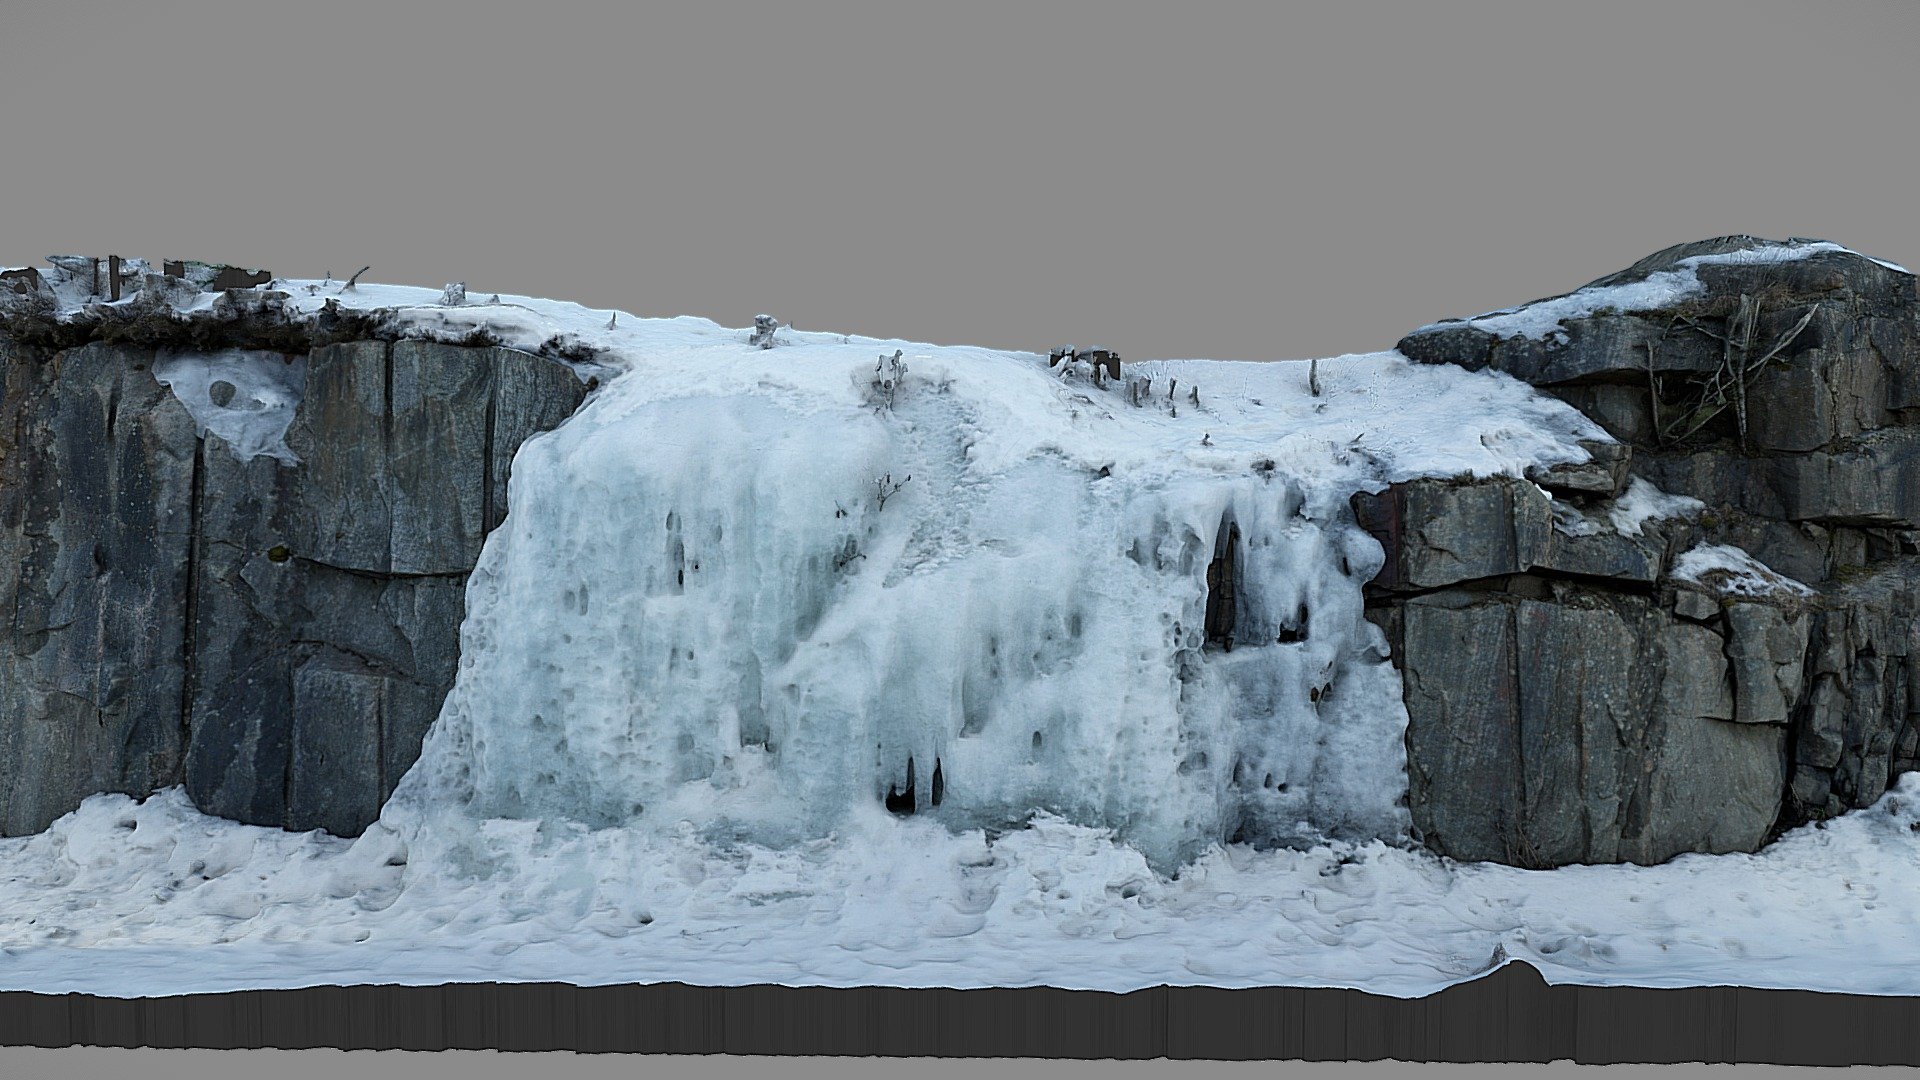 A natural wall of ice created by melting snow.

Photos taken with A7Riv + 20mm Sony FE

Processed with Metashape + Blender + Instant meshes - Wall of ice - Download Free 3D model by Lassi Kaukonen (@thesidekick) 3d model